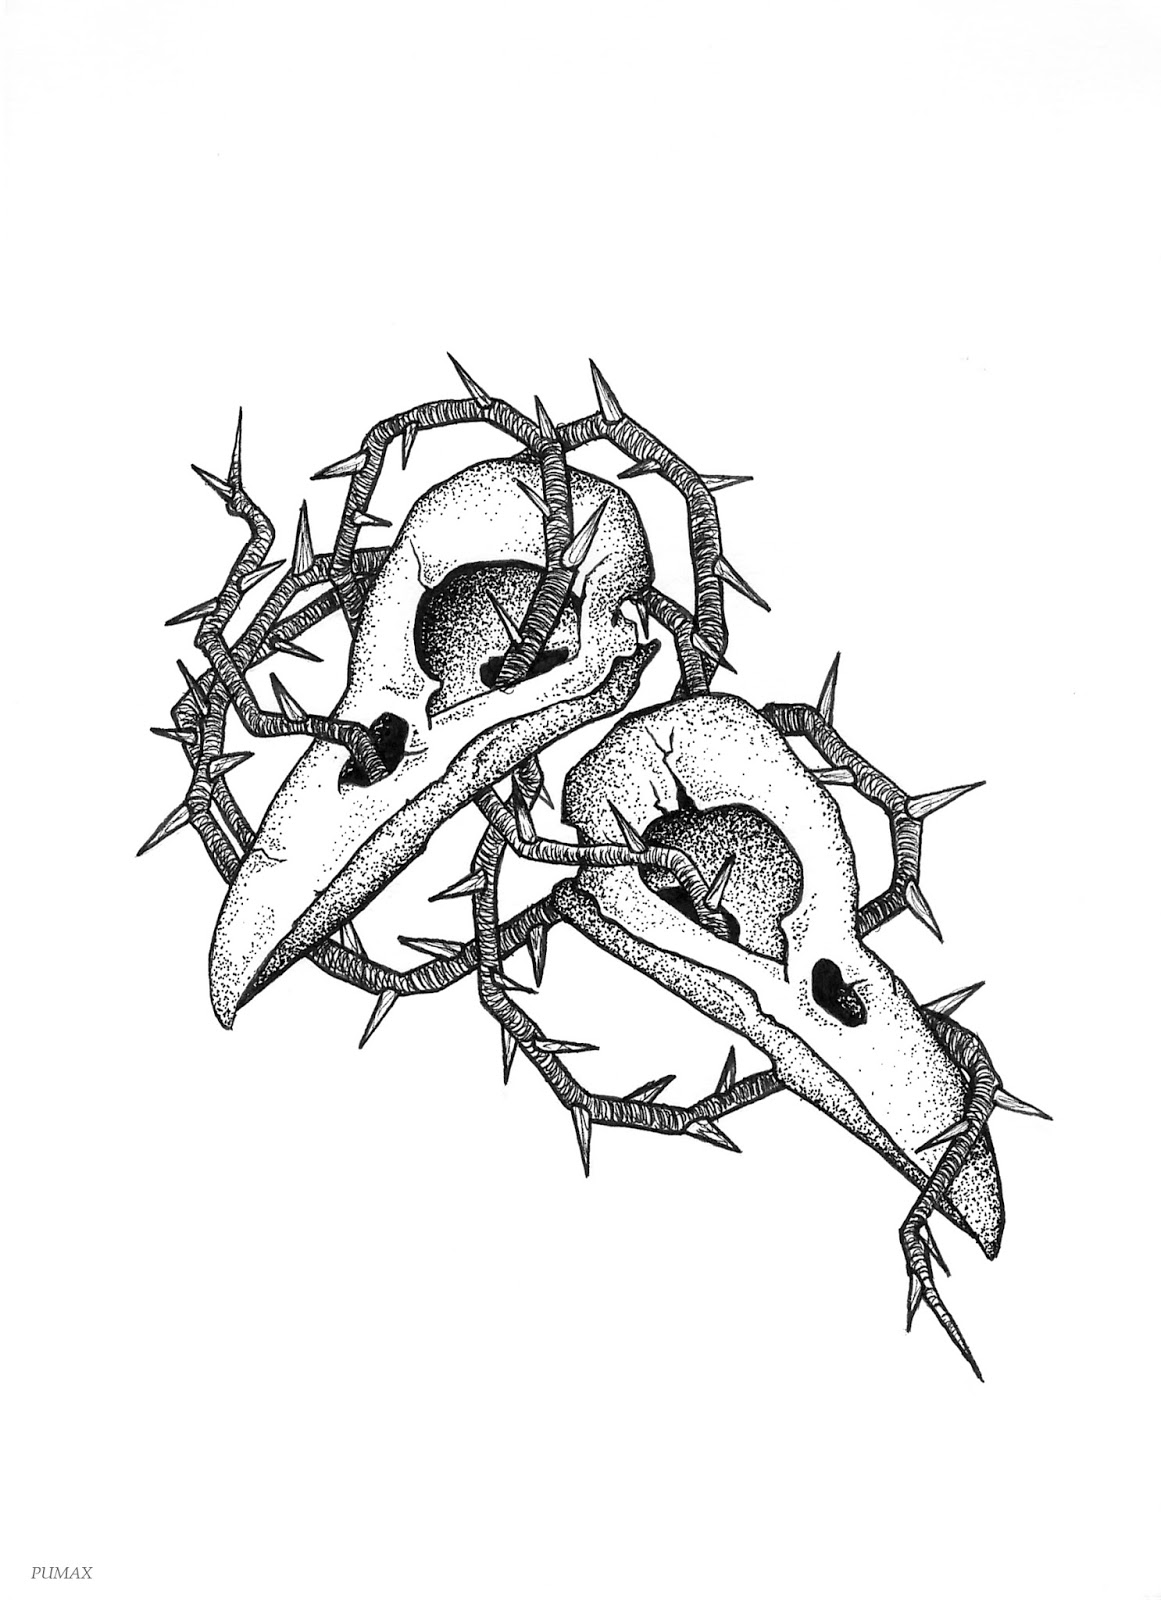 crow skull sketch frontal view